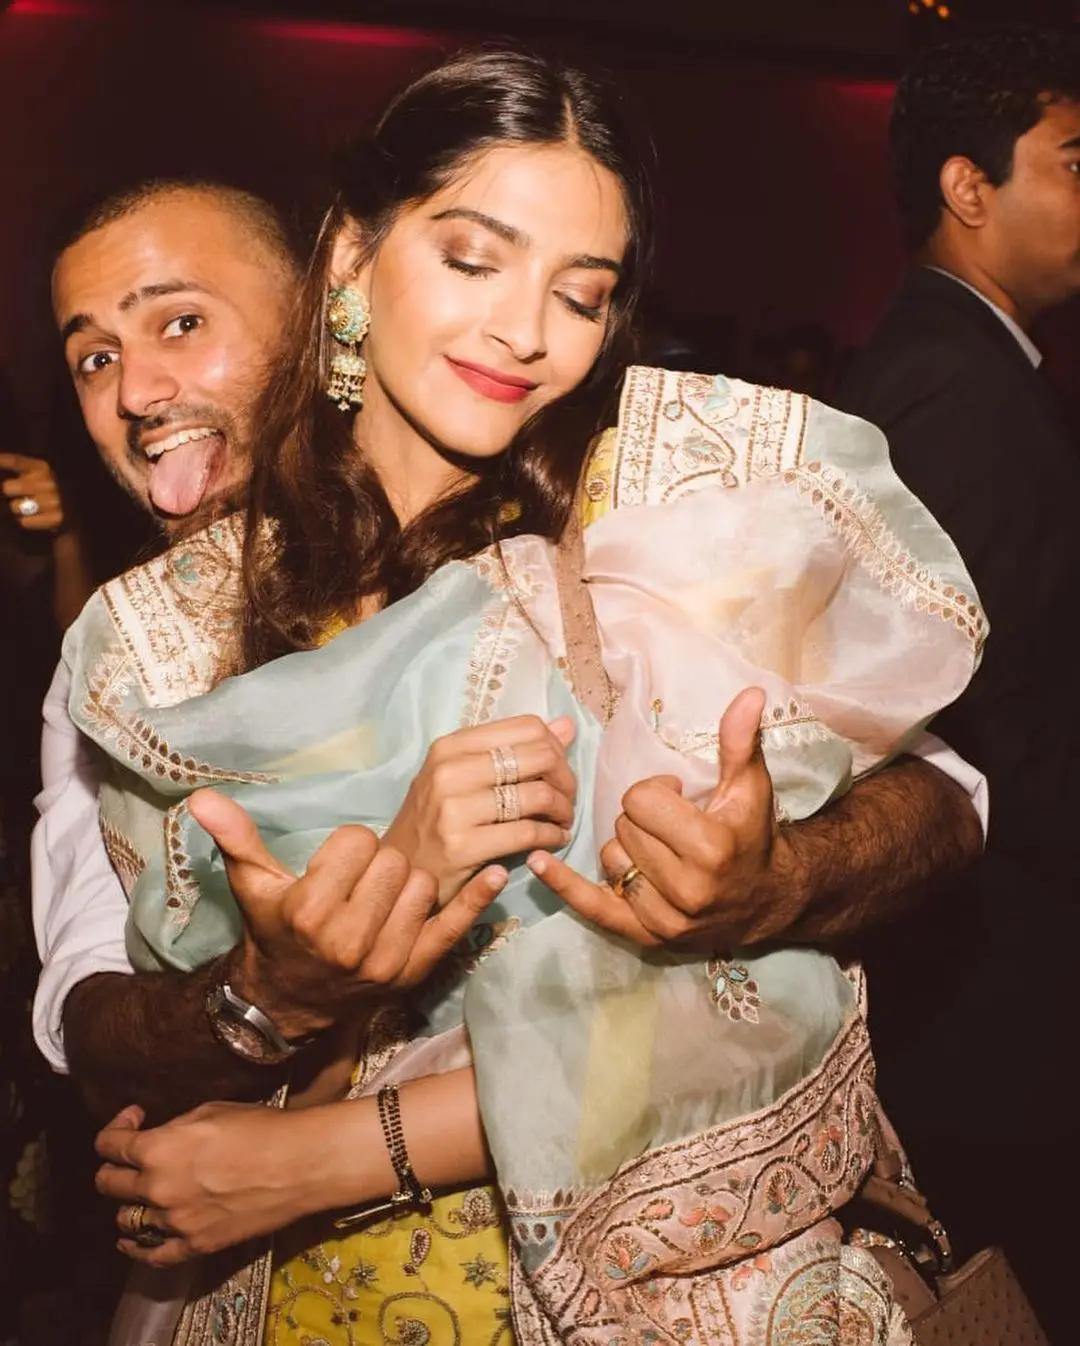 Sonam Kapoor and Anand Ahuja got married in 2018